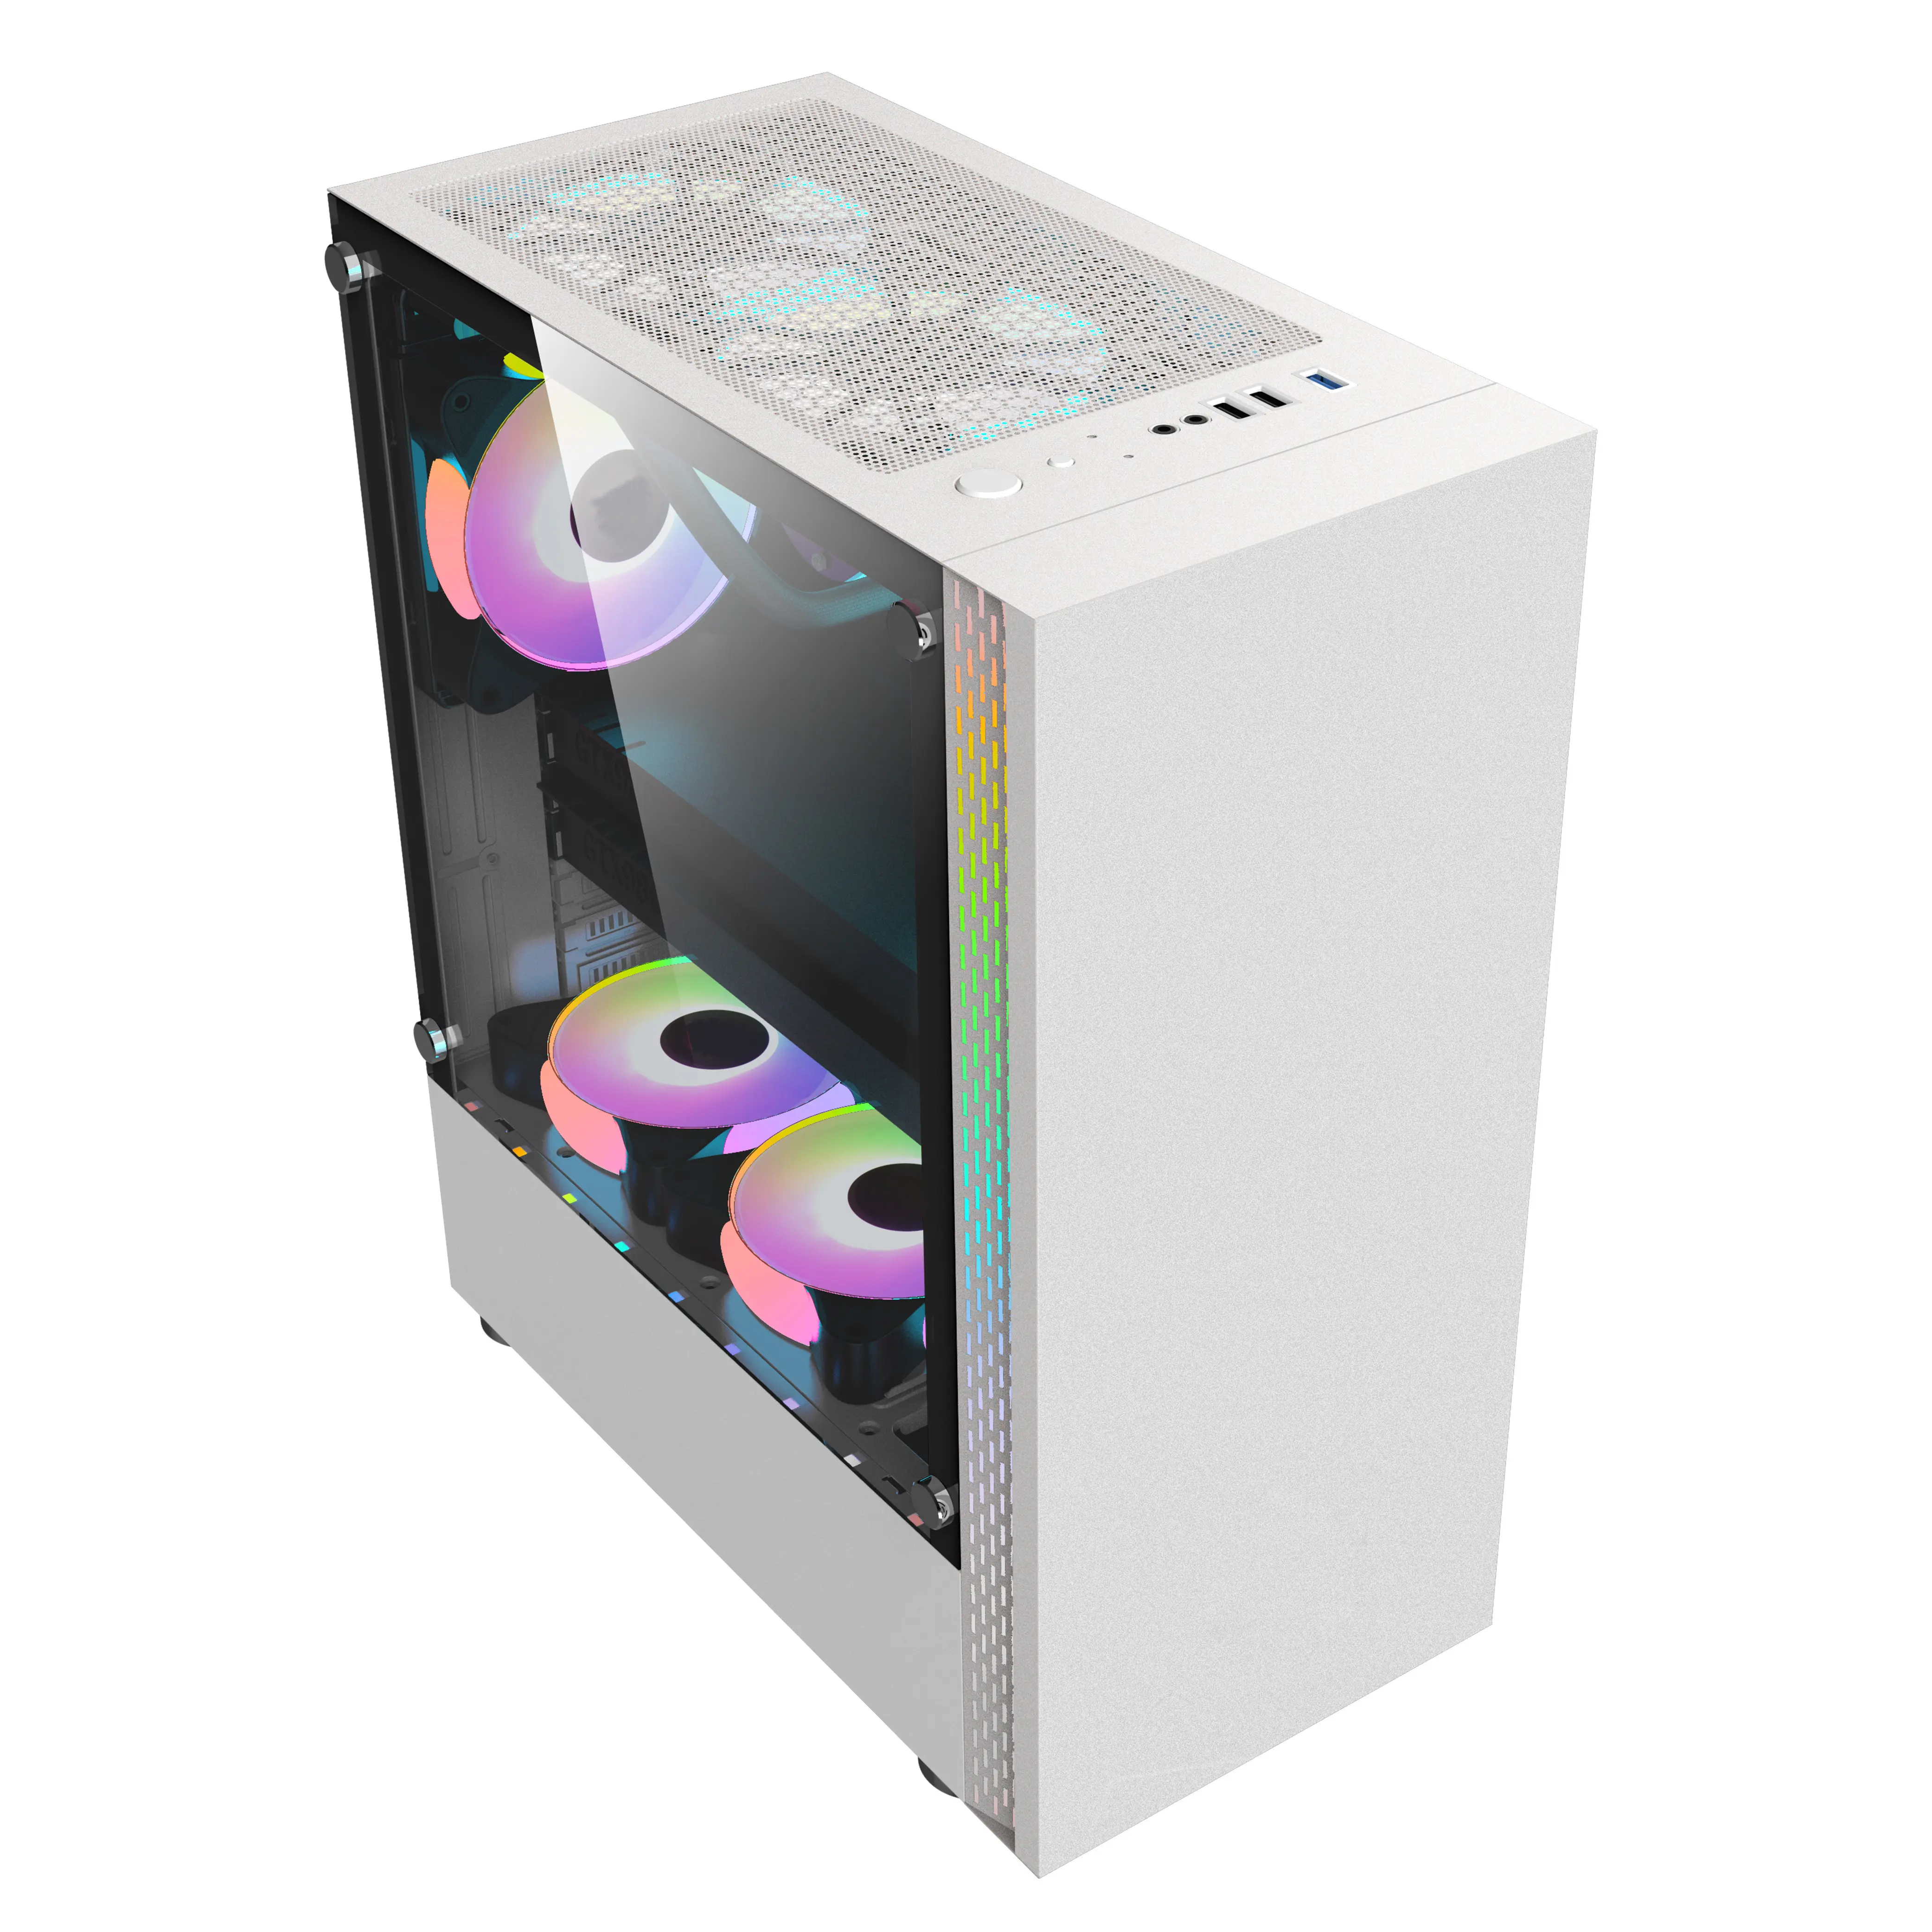 making machine plexiglass diy cooler deluxe RGB manufacturing gaming computer for pc case